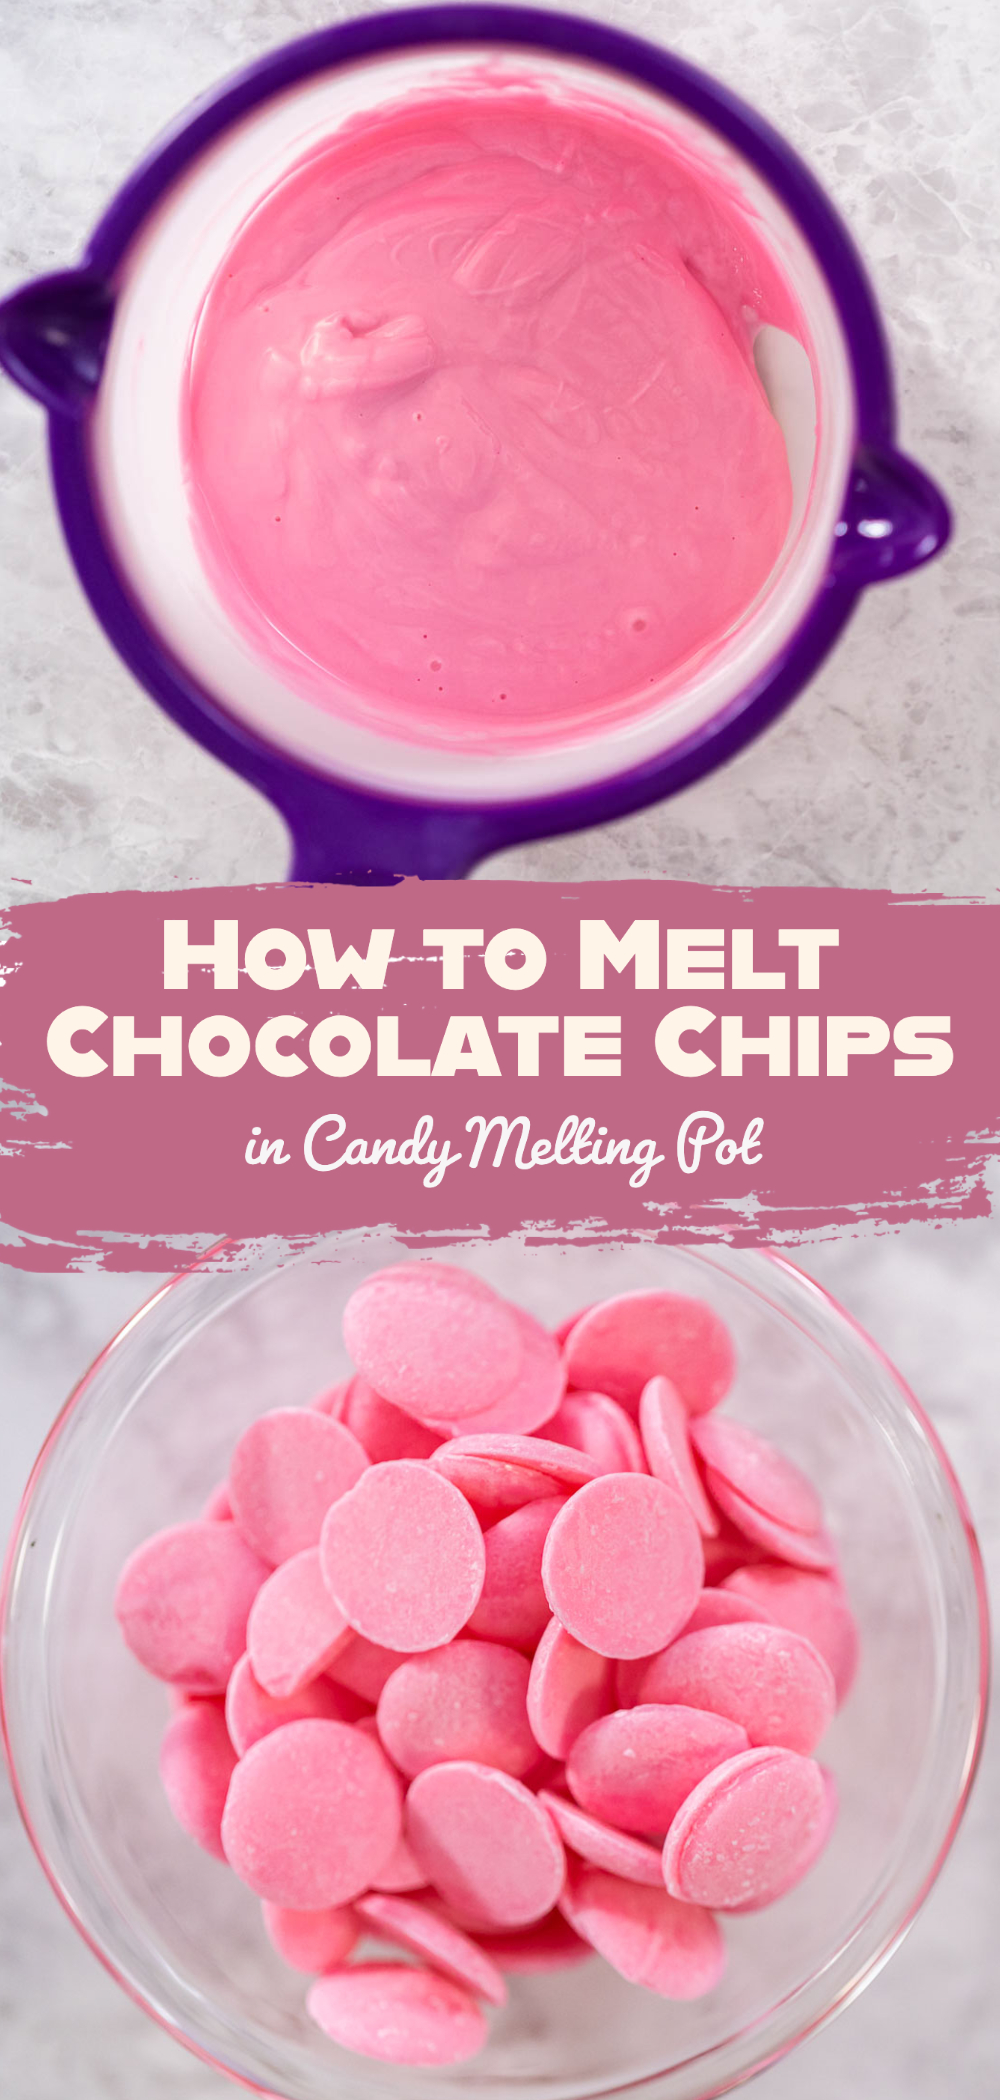 How to Melt Chocolate Chips in Candy Melting Pot